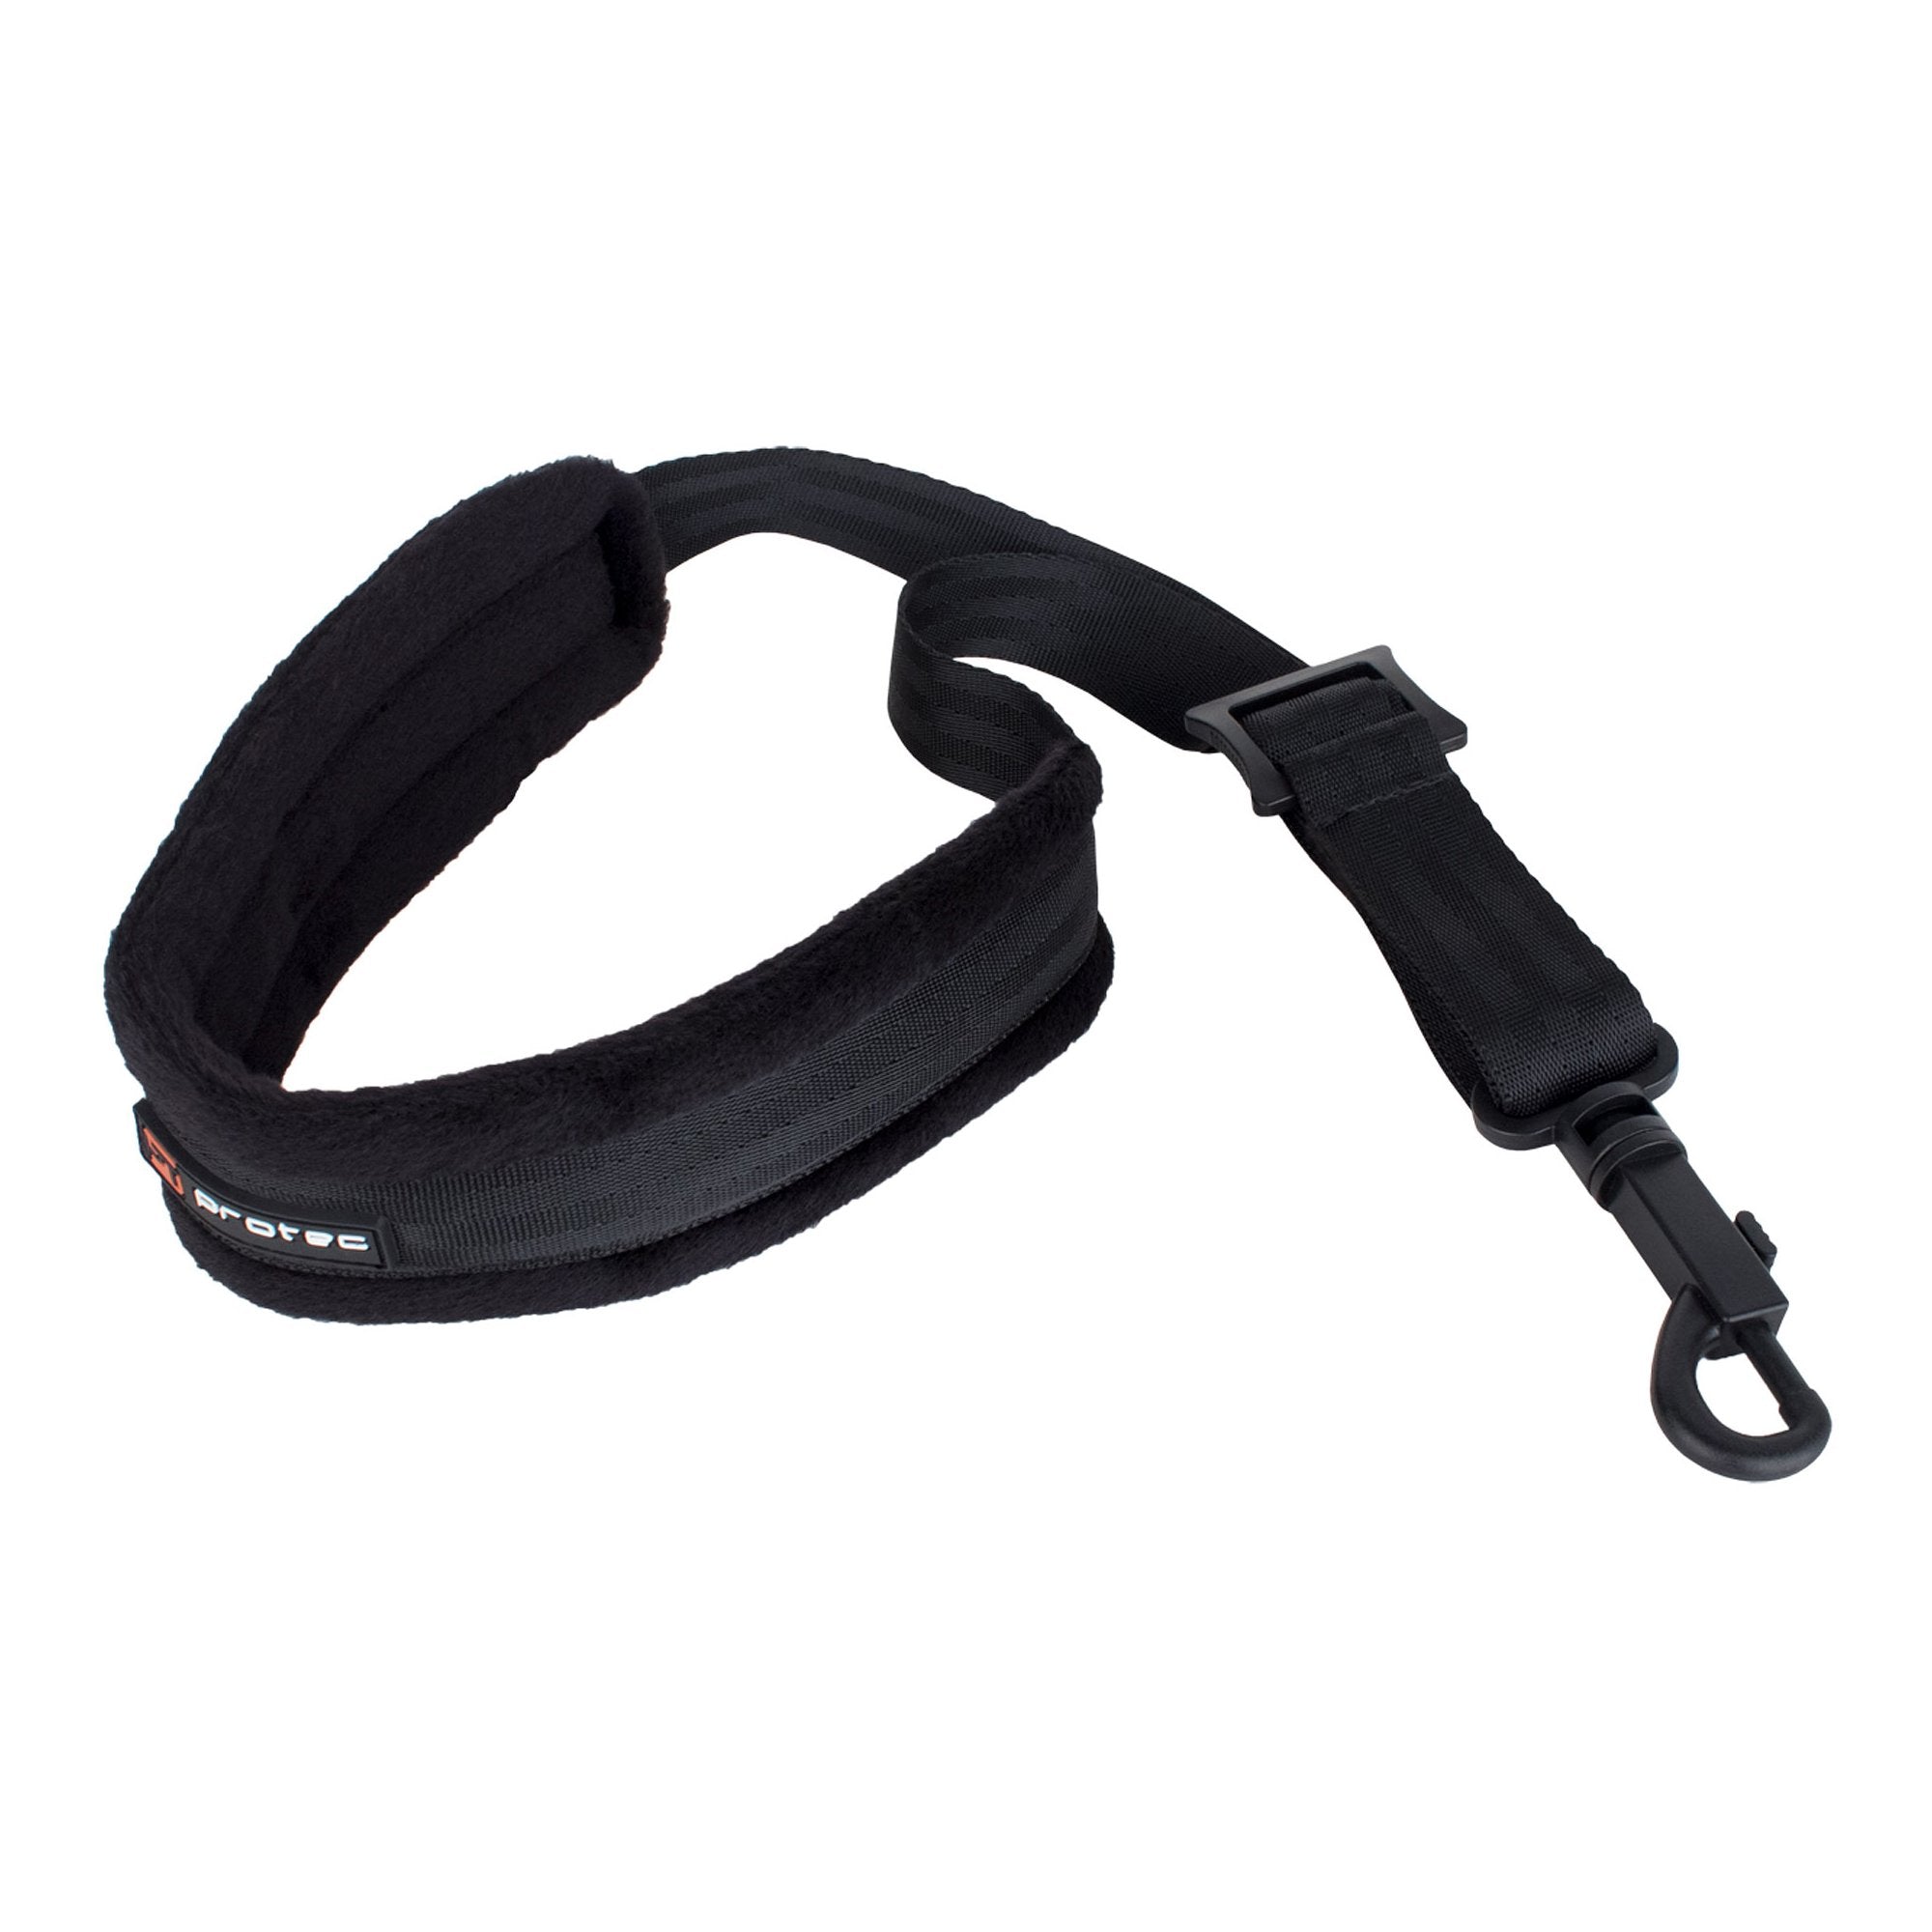 Protec - Saxophone Neck Straps Featuring Velour Neck Pad and Plastic Swivel Snap-Accessories-Protec-Music Elements